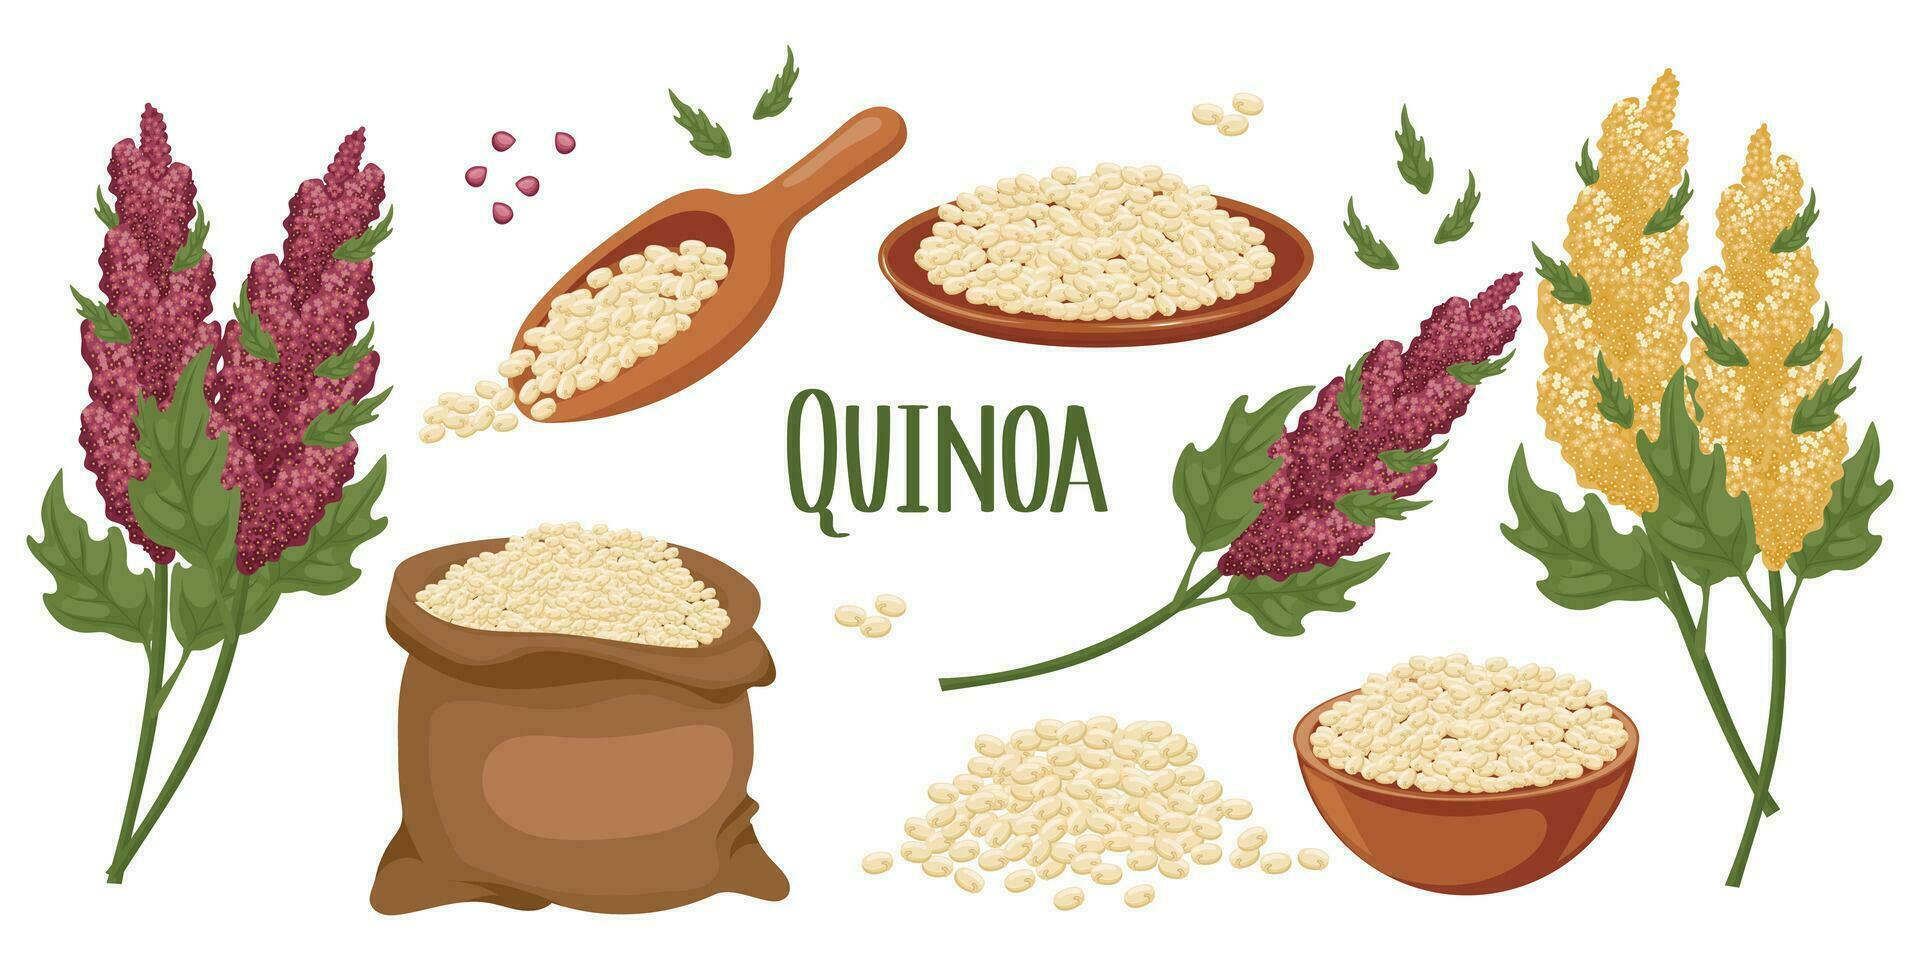 Set of quinoa grains and spikelets. Quinoa plant, quinoa grains in a plate, spoon and bag. Agriculture, food, design elements, vector